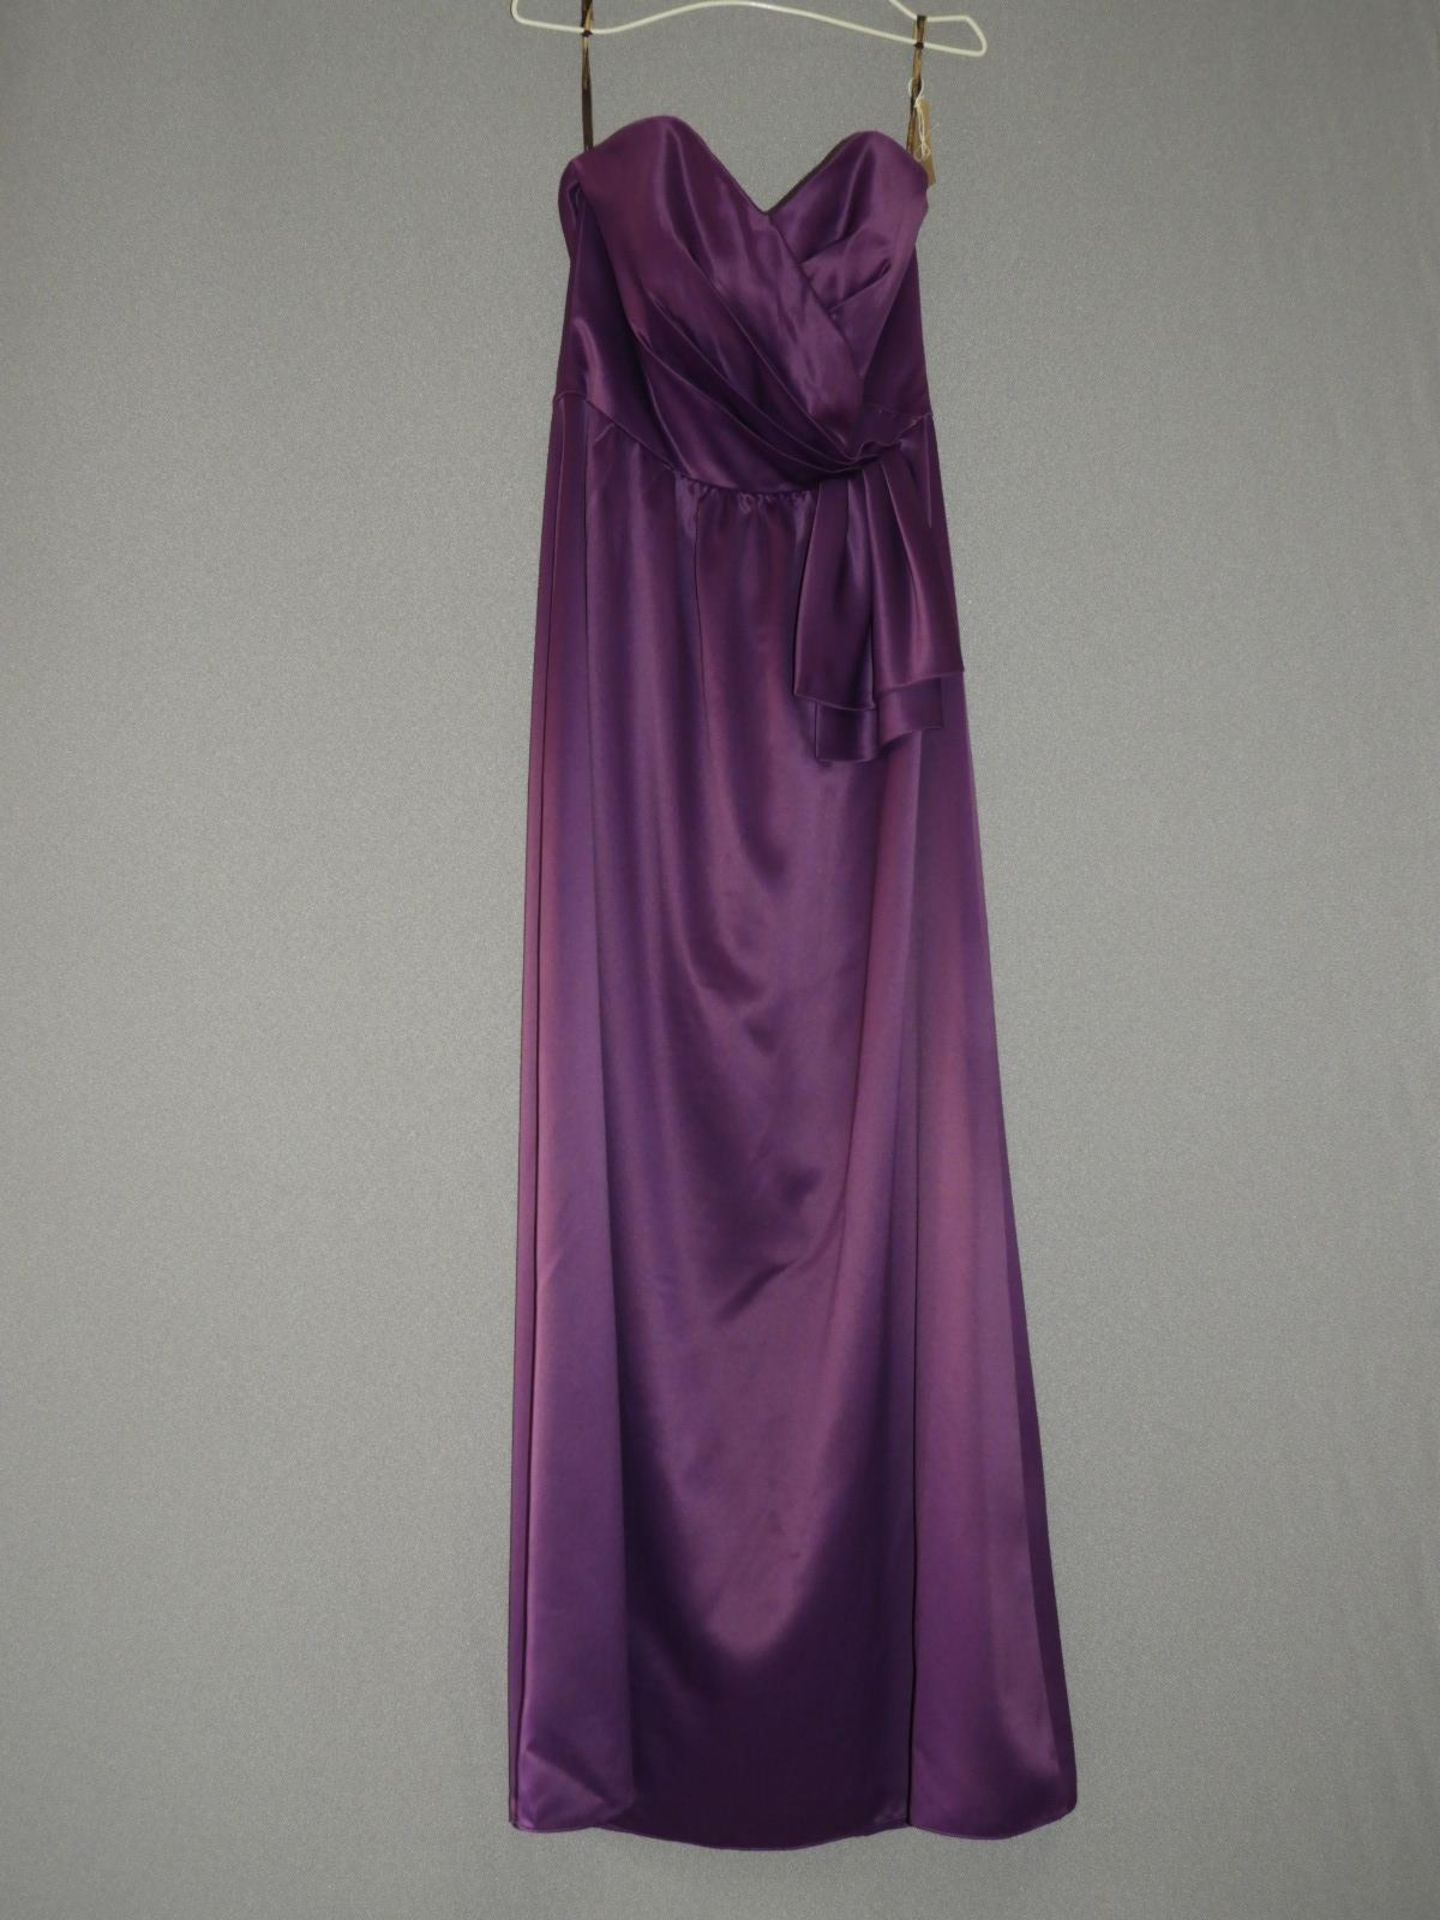 *Size: 10 African Violet Bridesmaid Dress by Lola